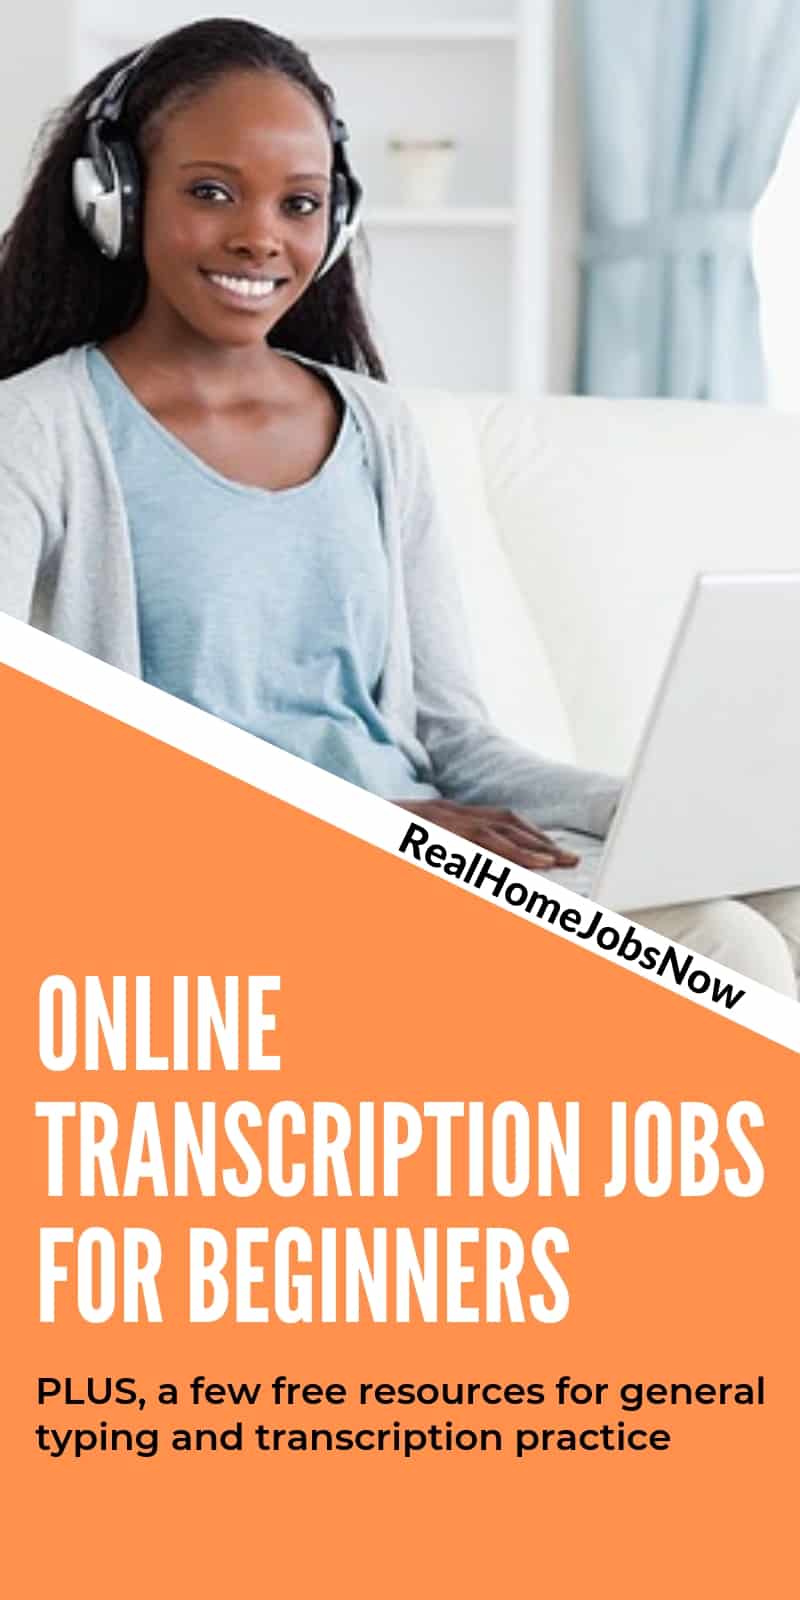 Work from home transcription jobs don't always require you to be an experienced transcriptionist. Check out these transcription opportunities for newbies! Online transcription jobs